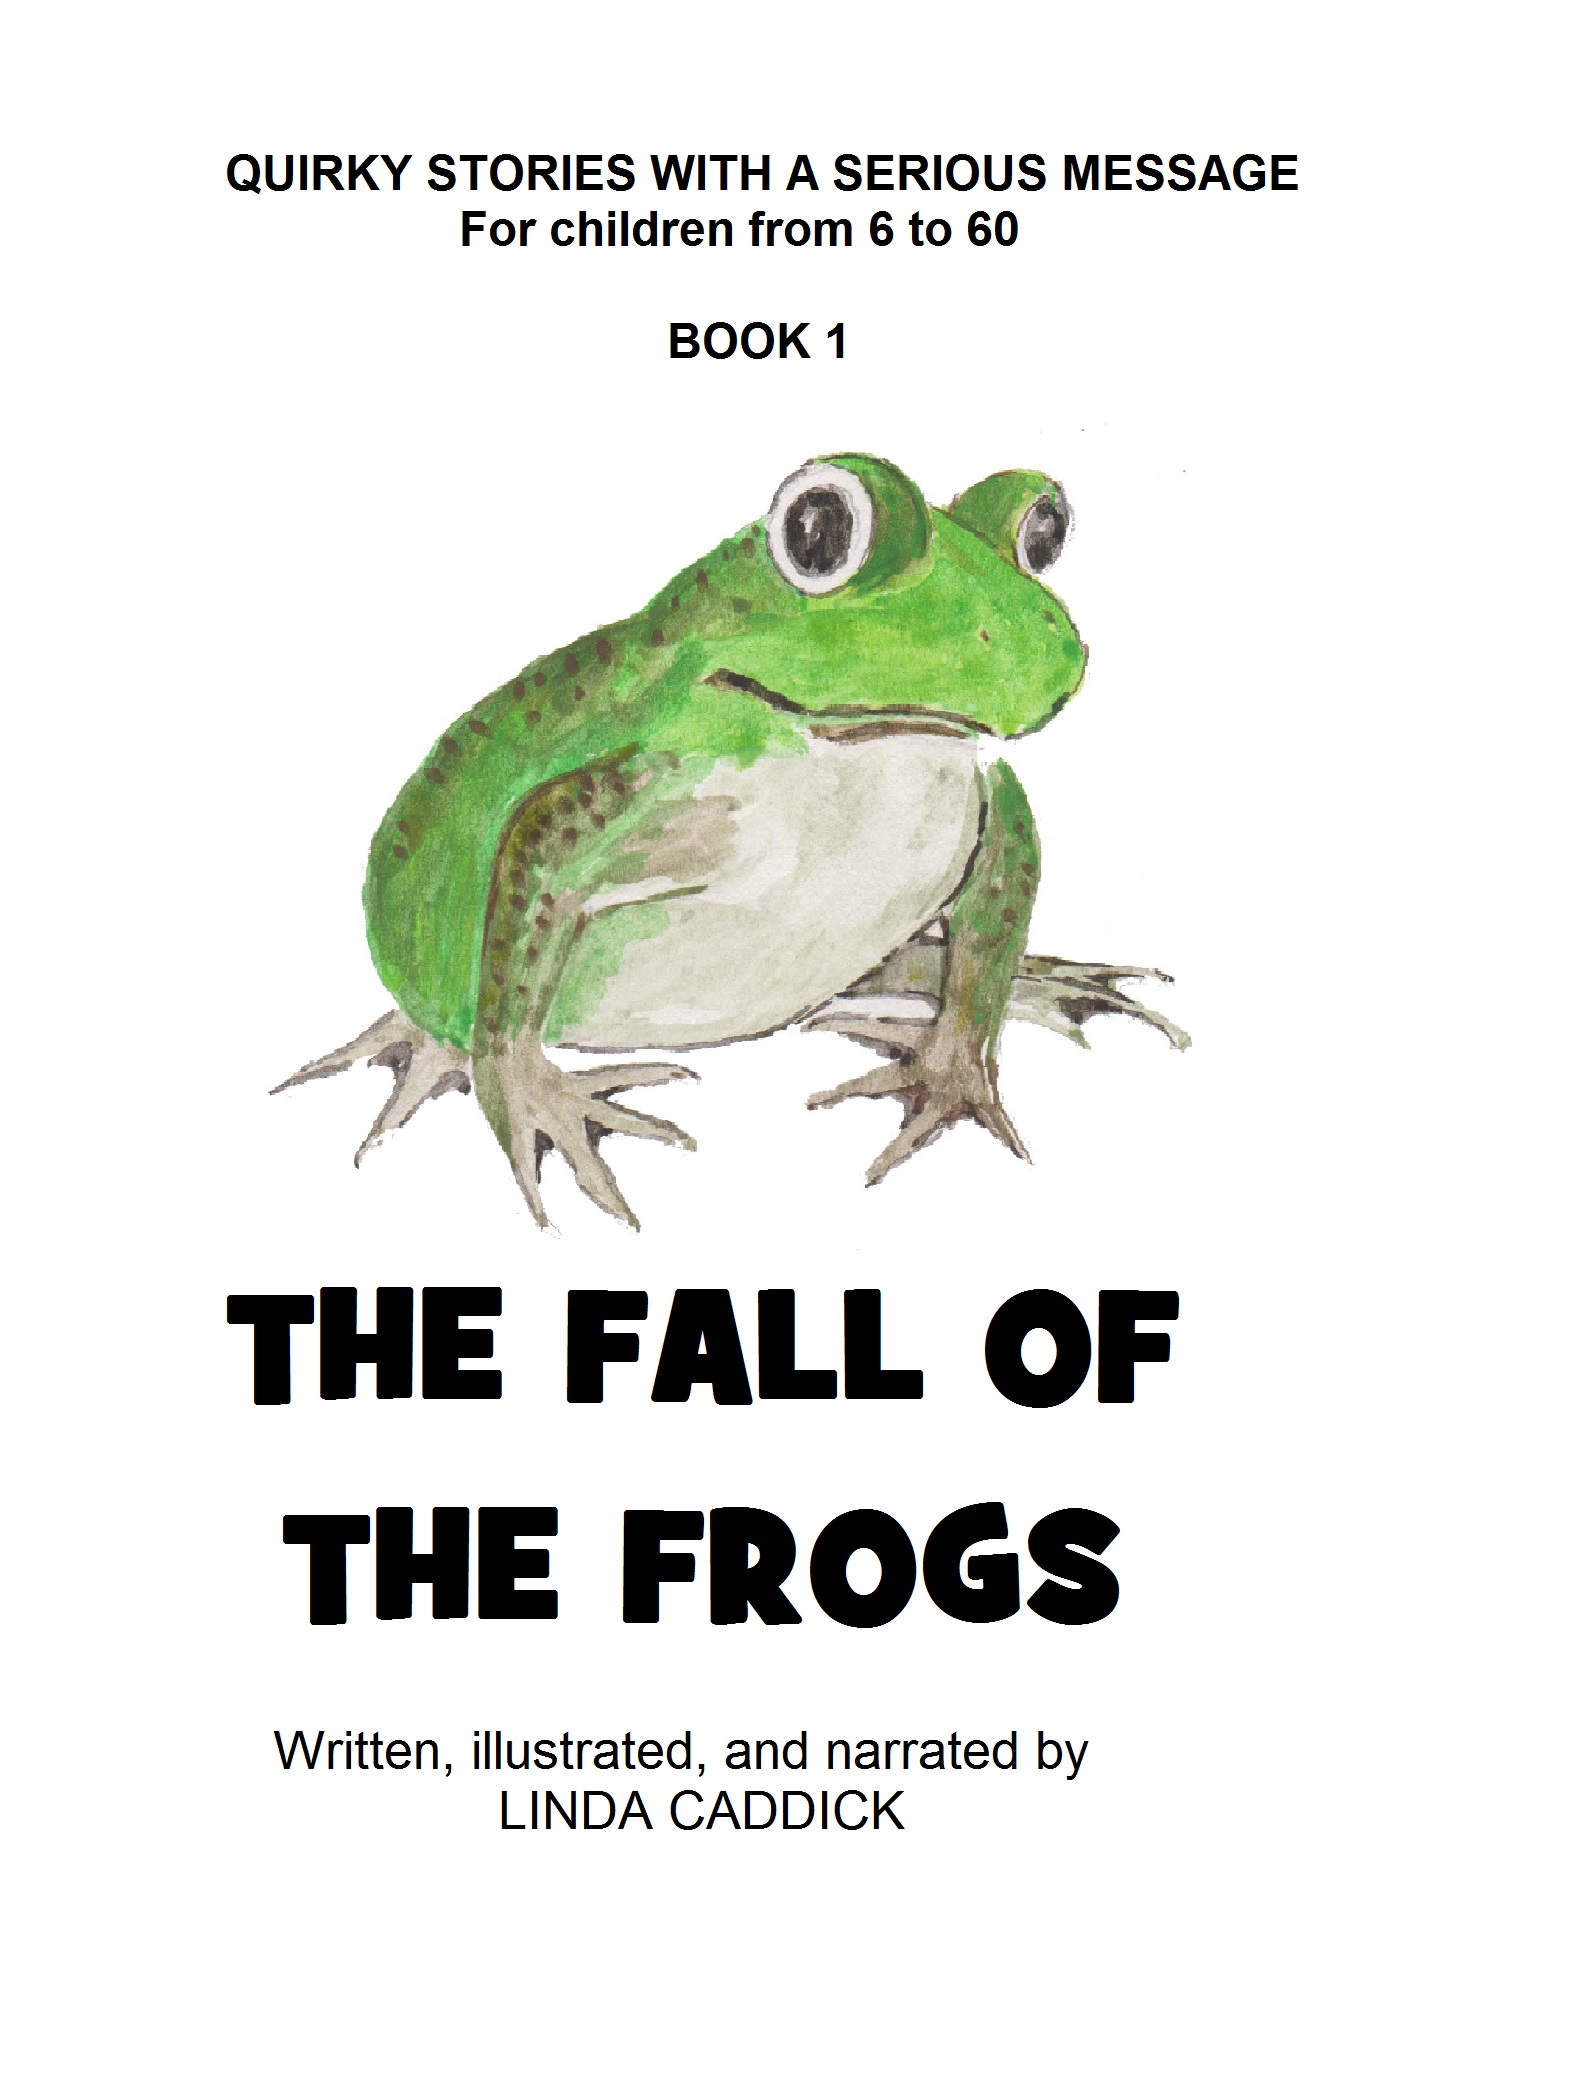 The Fall of the Frogs